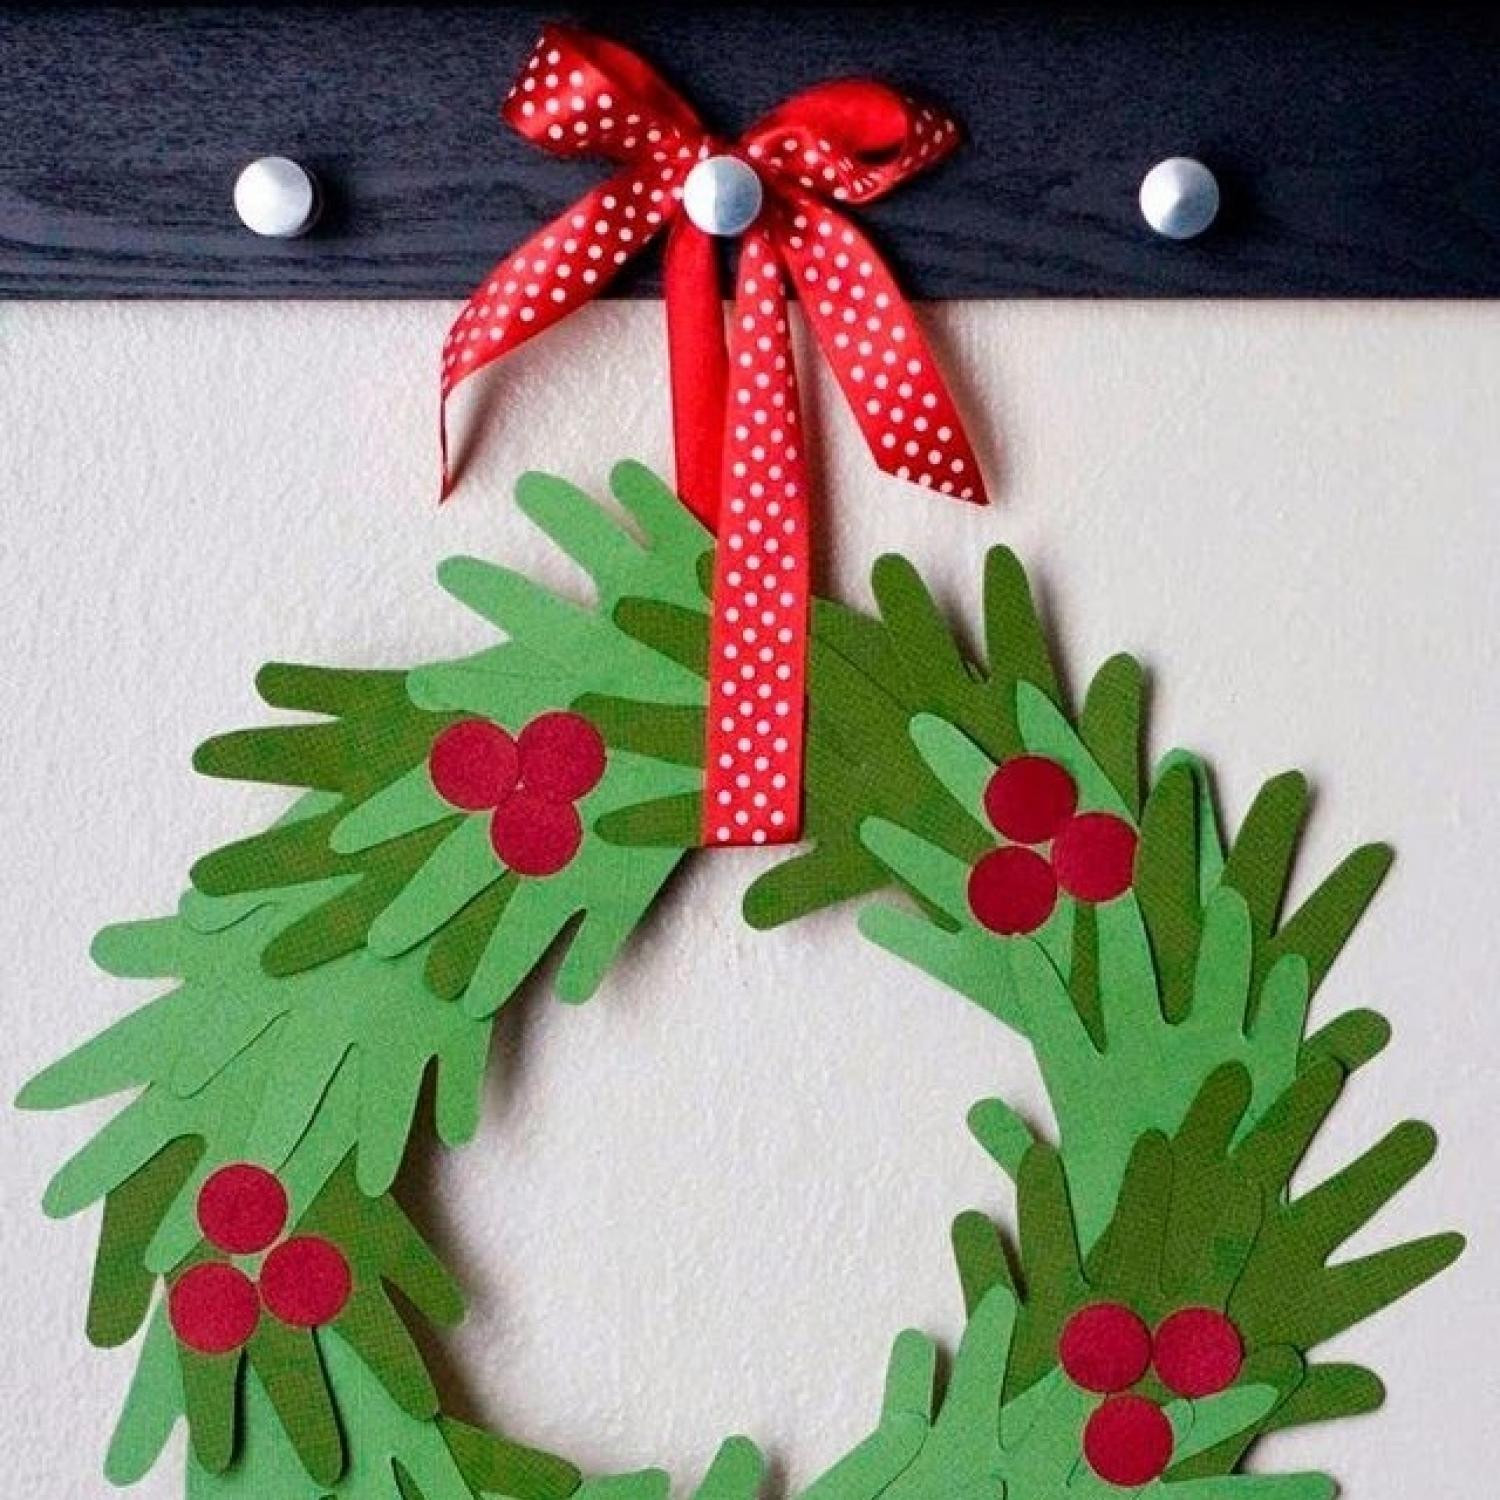 Kids Craft Projects
 10 Handprint Christmas Crafts for Kids